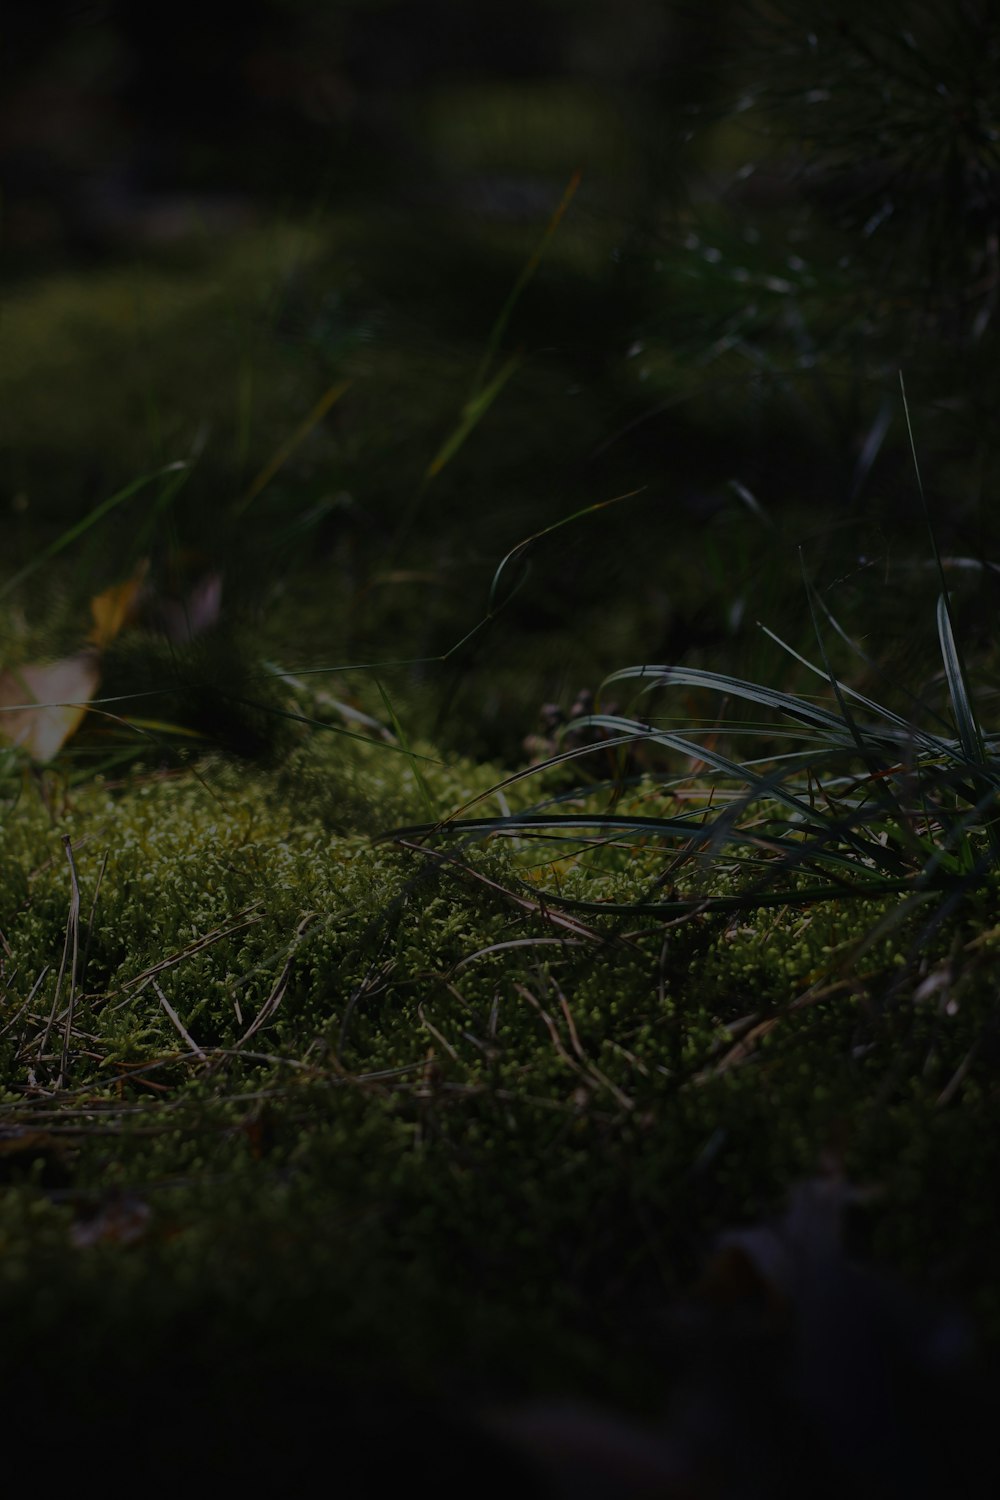 a small bird sitting on a moss covered ground